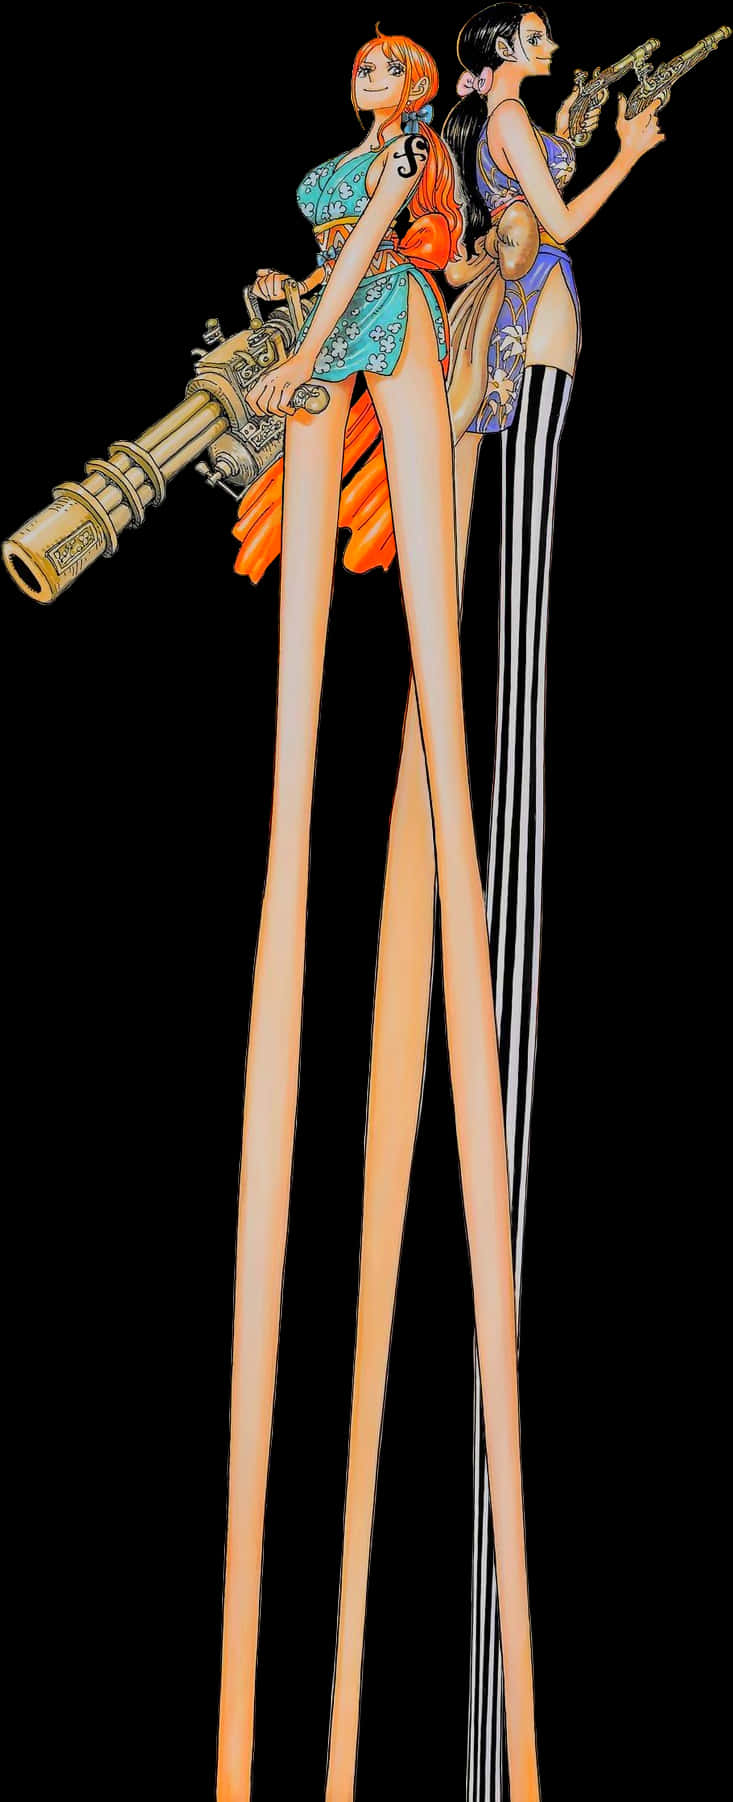 A Close Up Of A Pair Of Long Wooden Legs